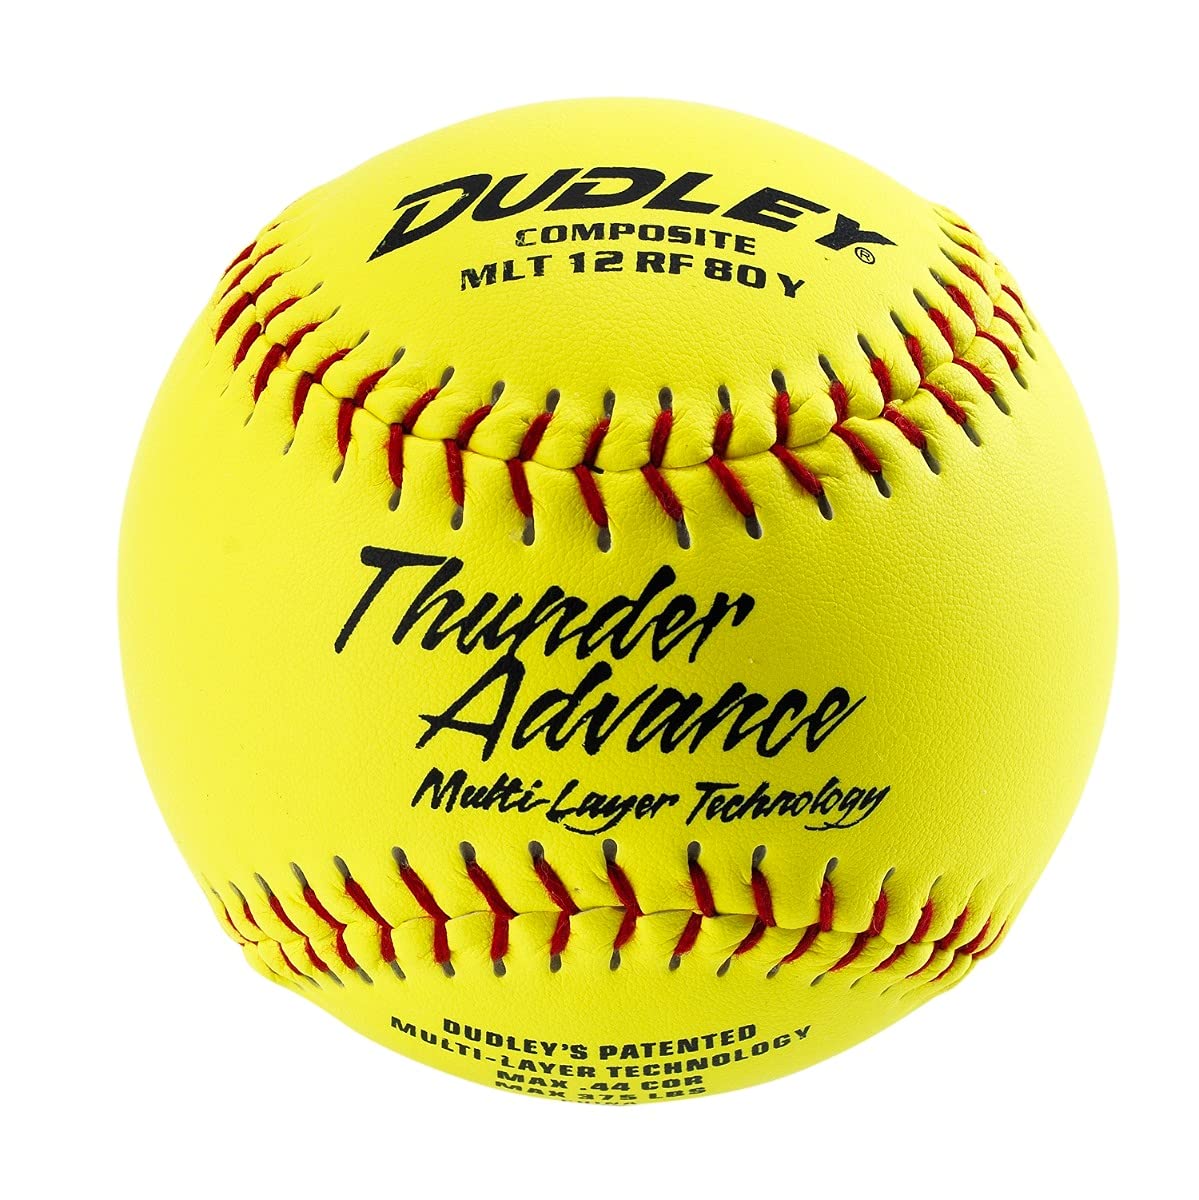 Dudley Thunder Advance 12" Slow Pitch Softball - Composite Cover - Pack of 12